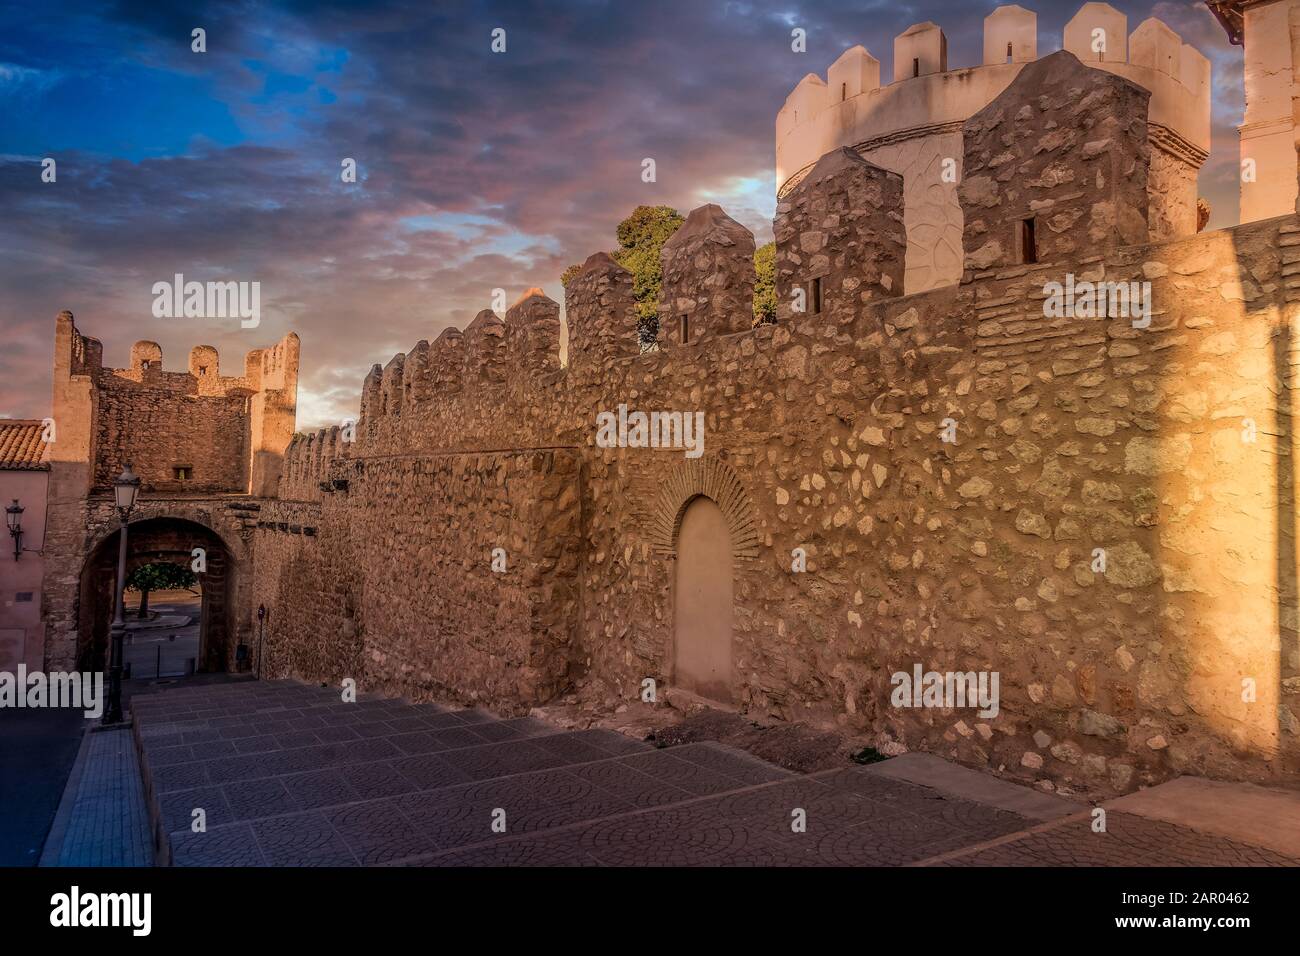 Pou medieval gate near Benisano castle in Valencia province Spain with dramatic sunset sky Stock Photo